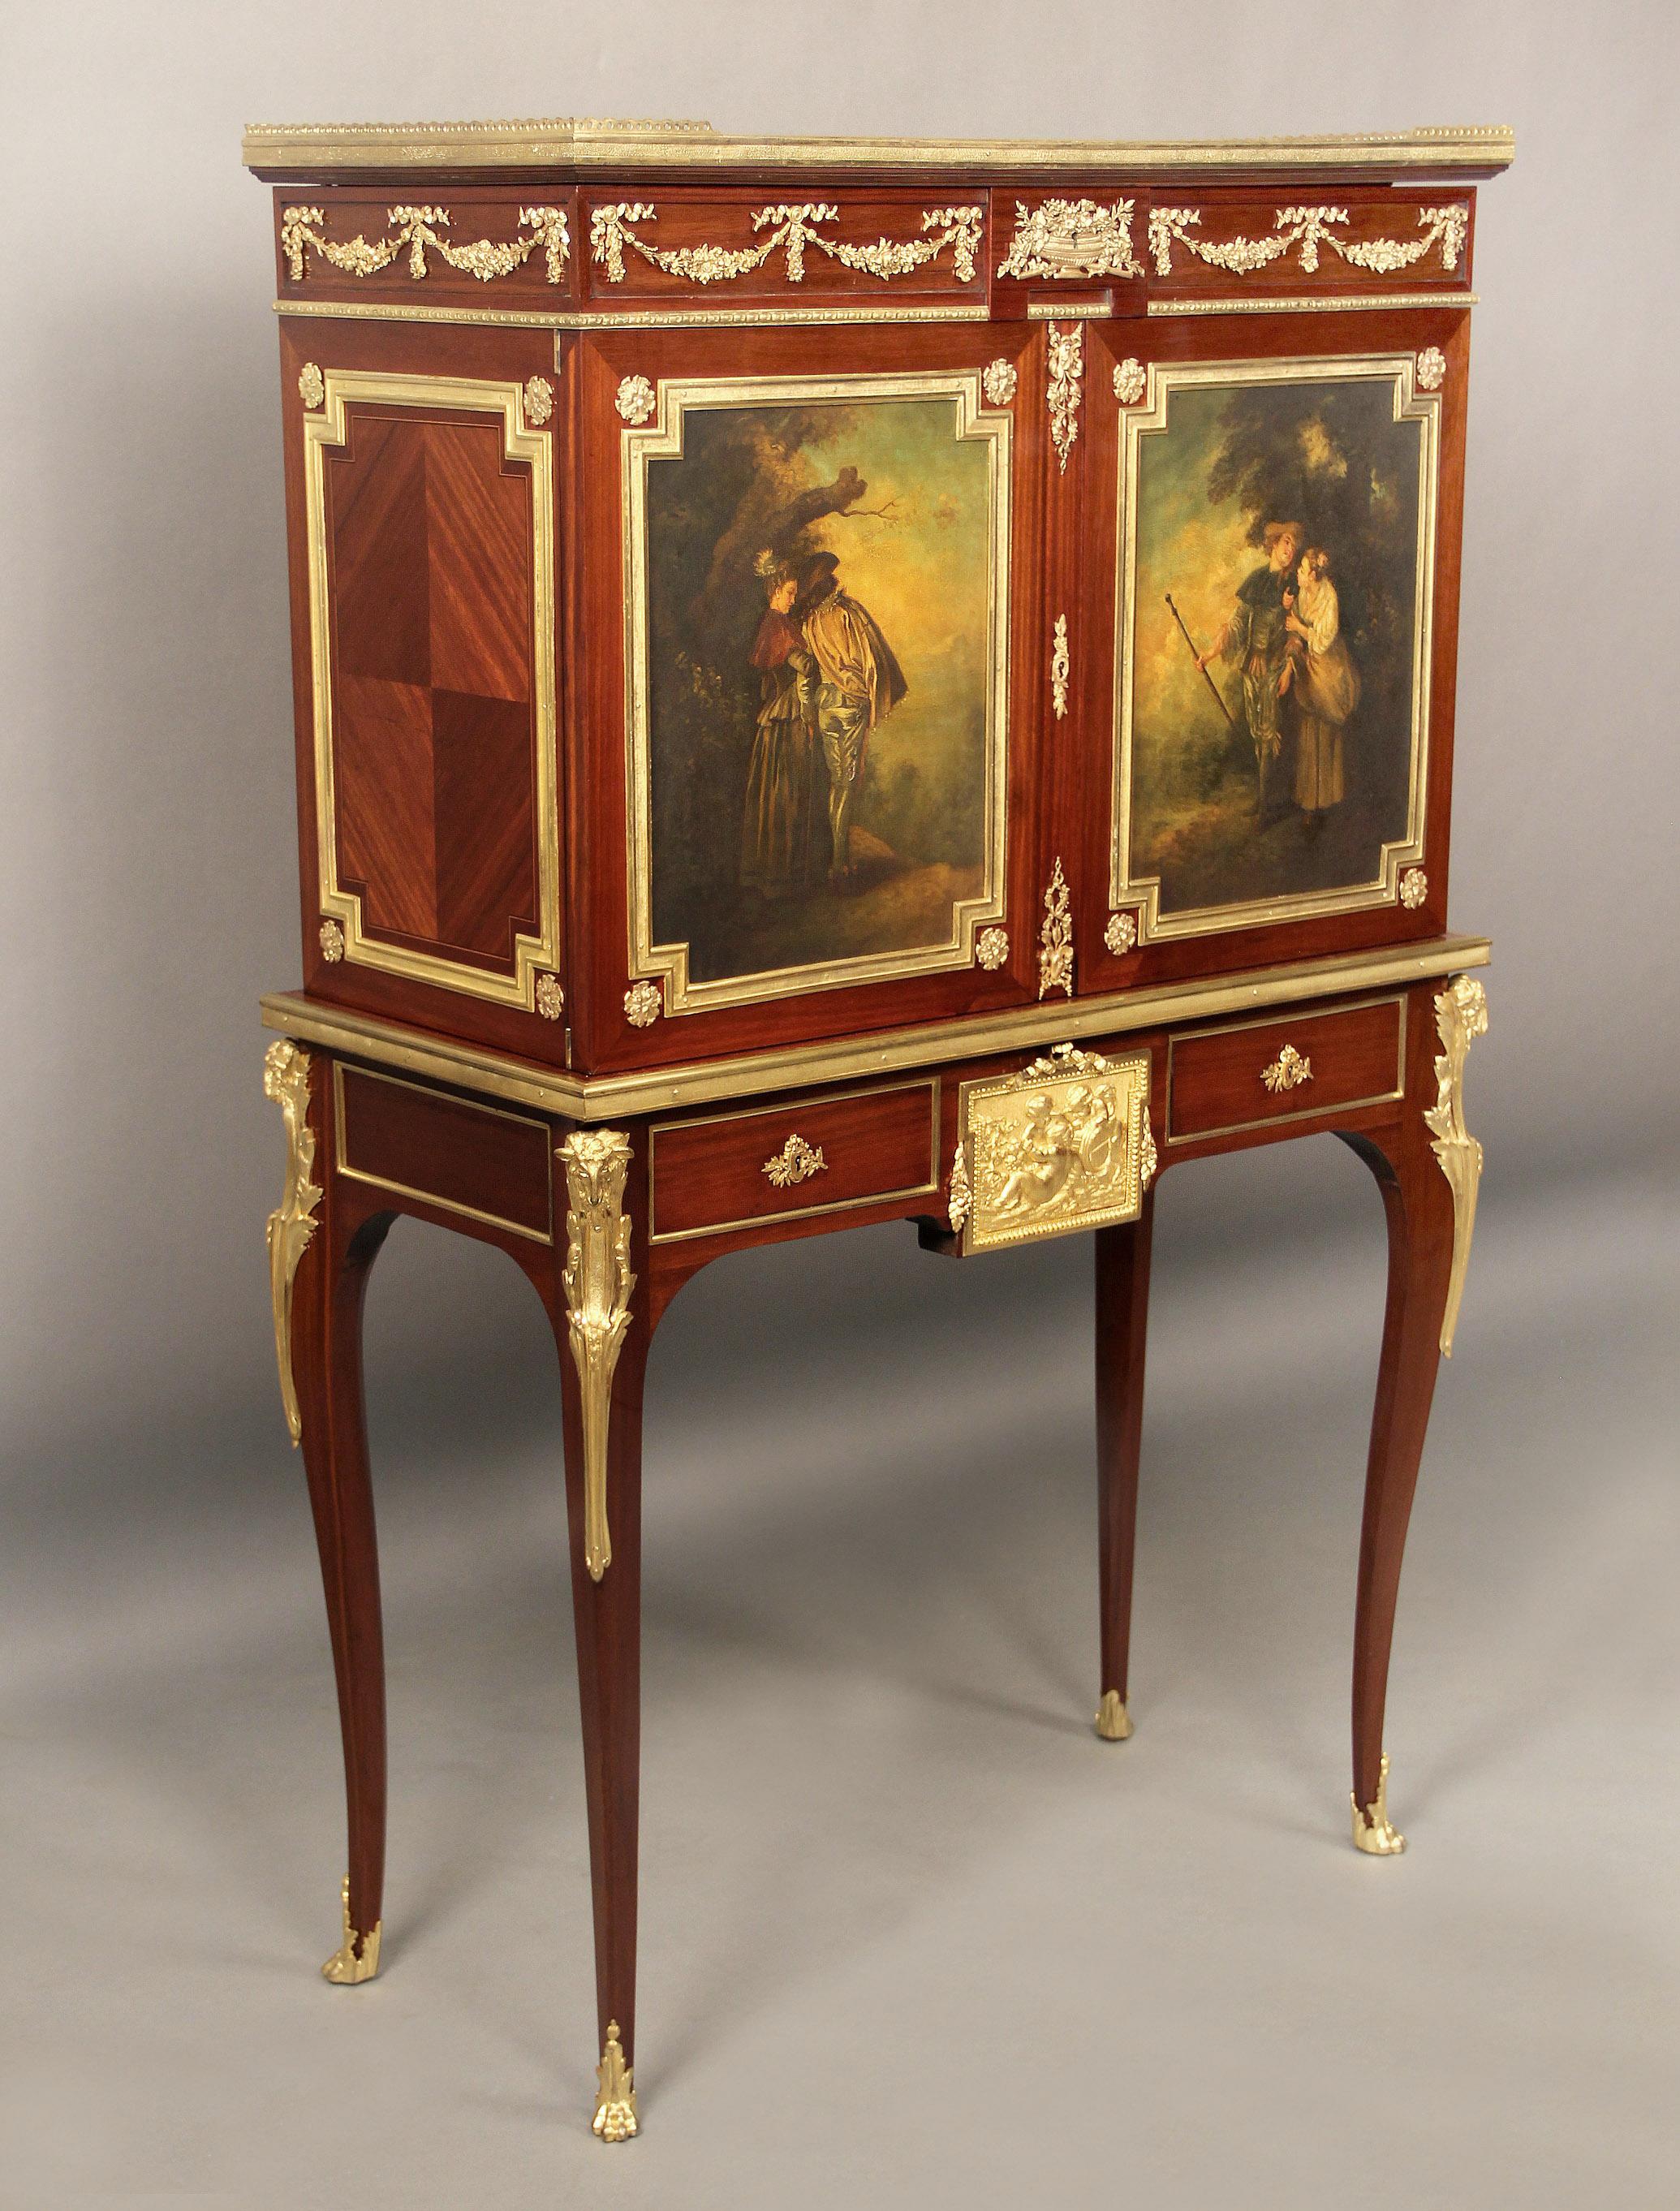 A fantastic quality late 19th century Louis XV style gilt bronze-mounted Vernis Martin cabinet

By Paul Sormani.

The upper tier of the cabinet with a pierced bronze gallery above two painted panels depicting love scenes, two drawers are